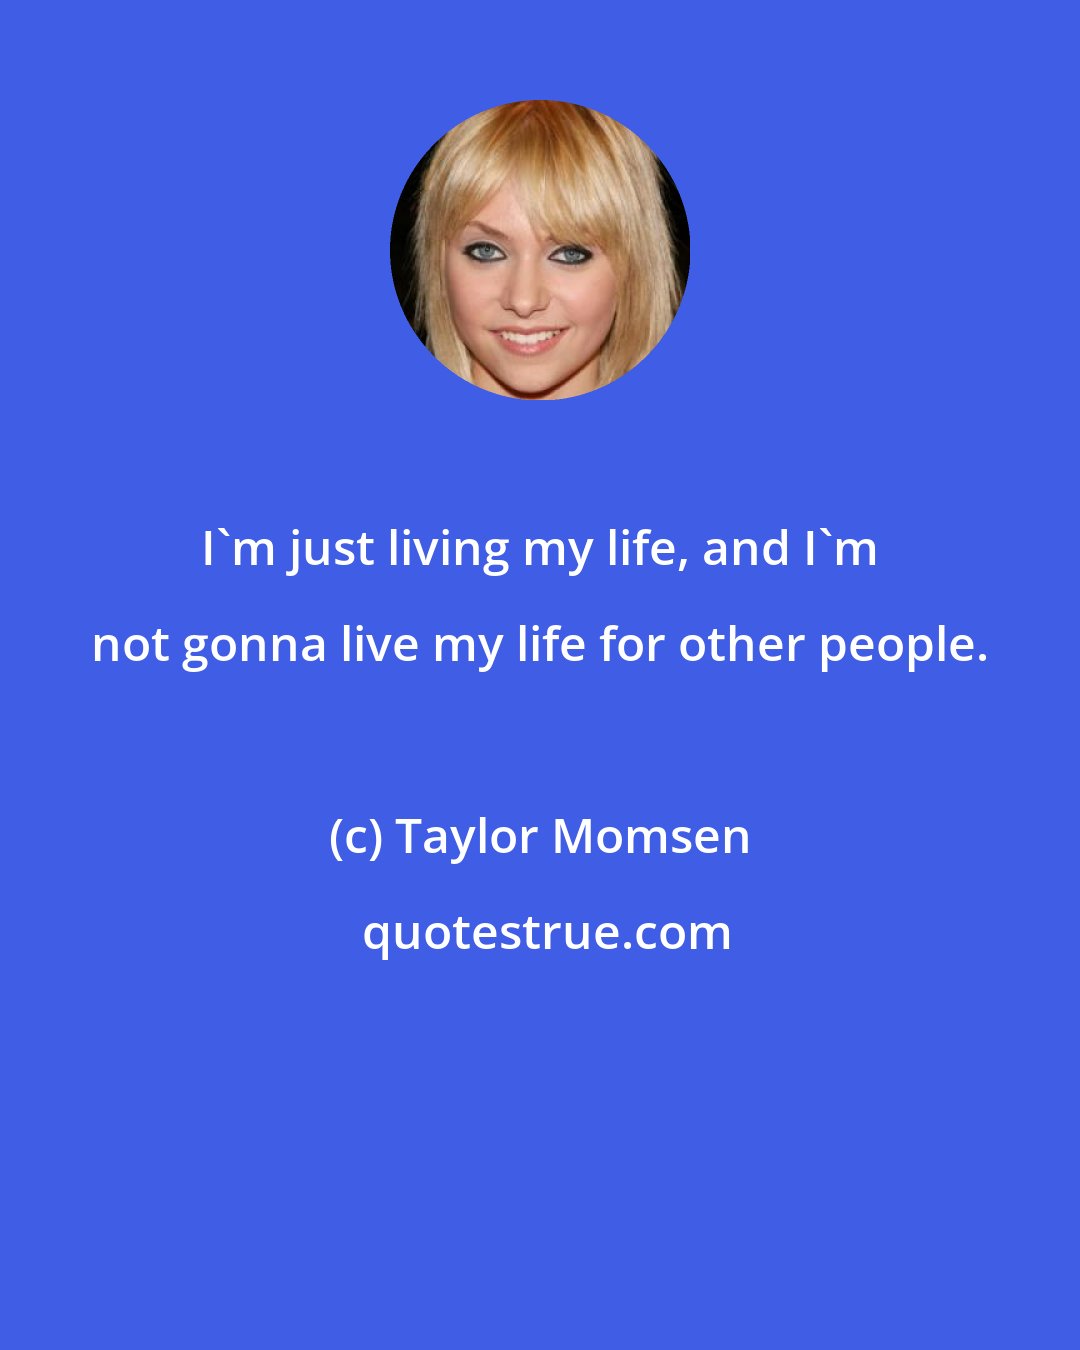 Taylor Momsen: I'm just living my life, and I'm not gonna live my life for other people.